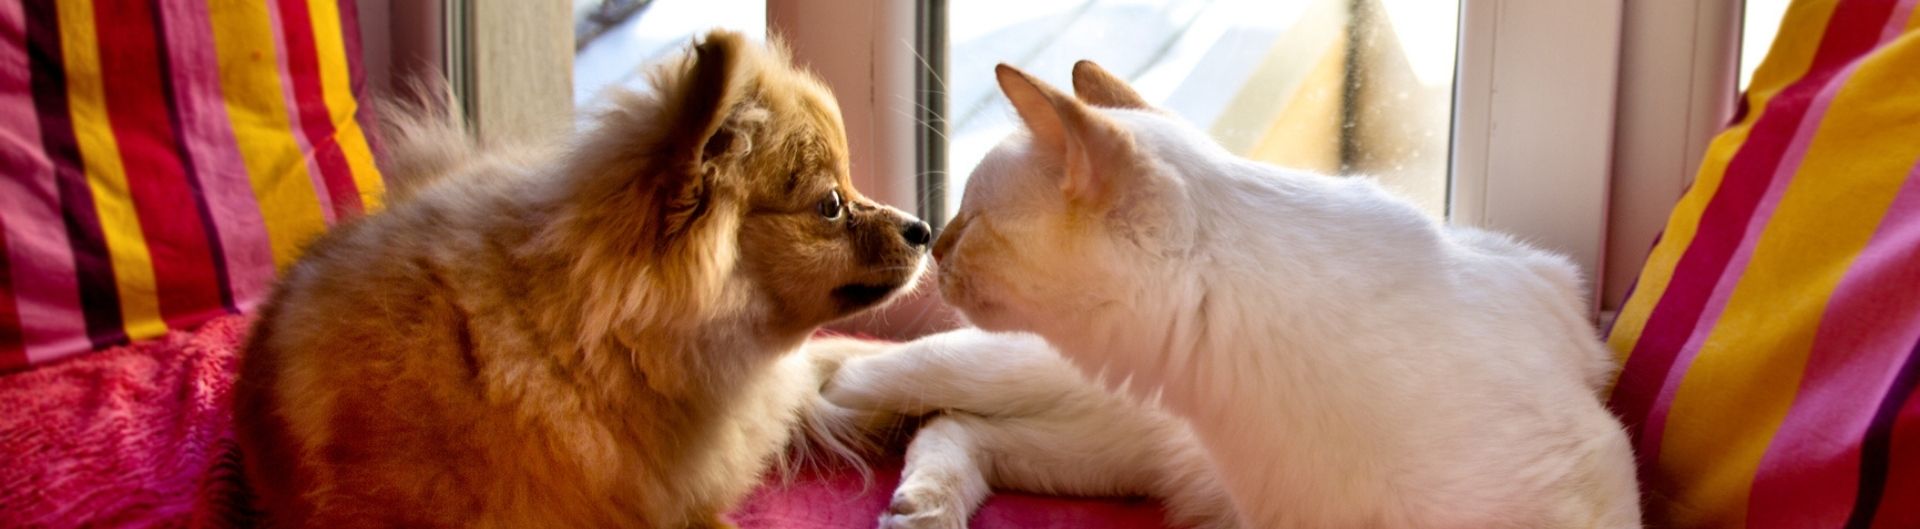 dog and cat touching noses